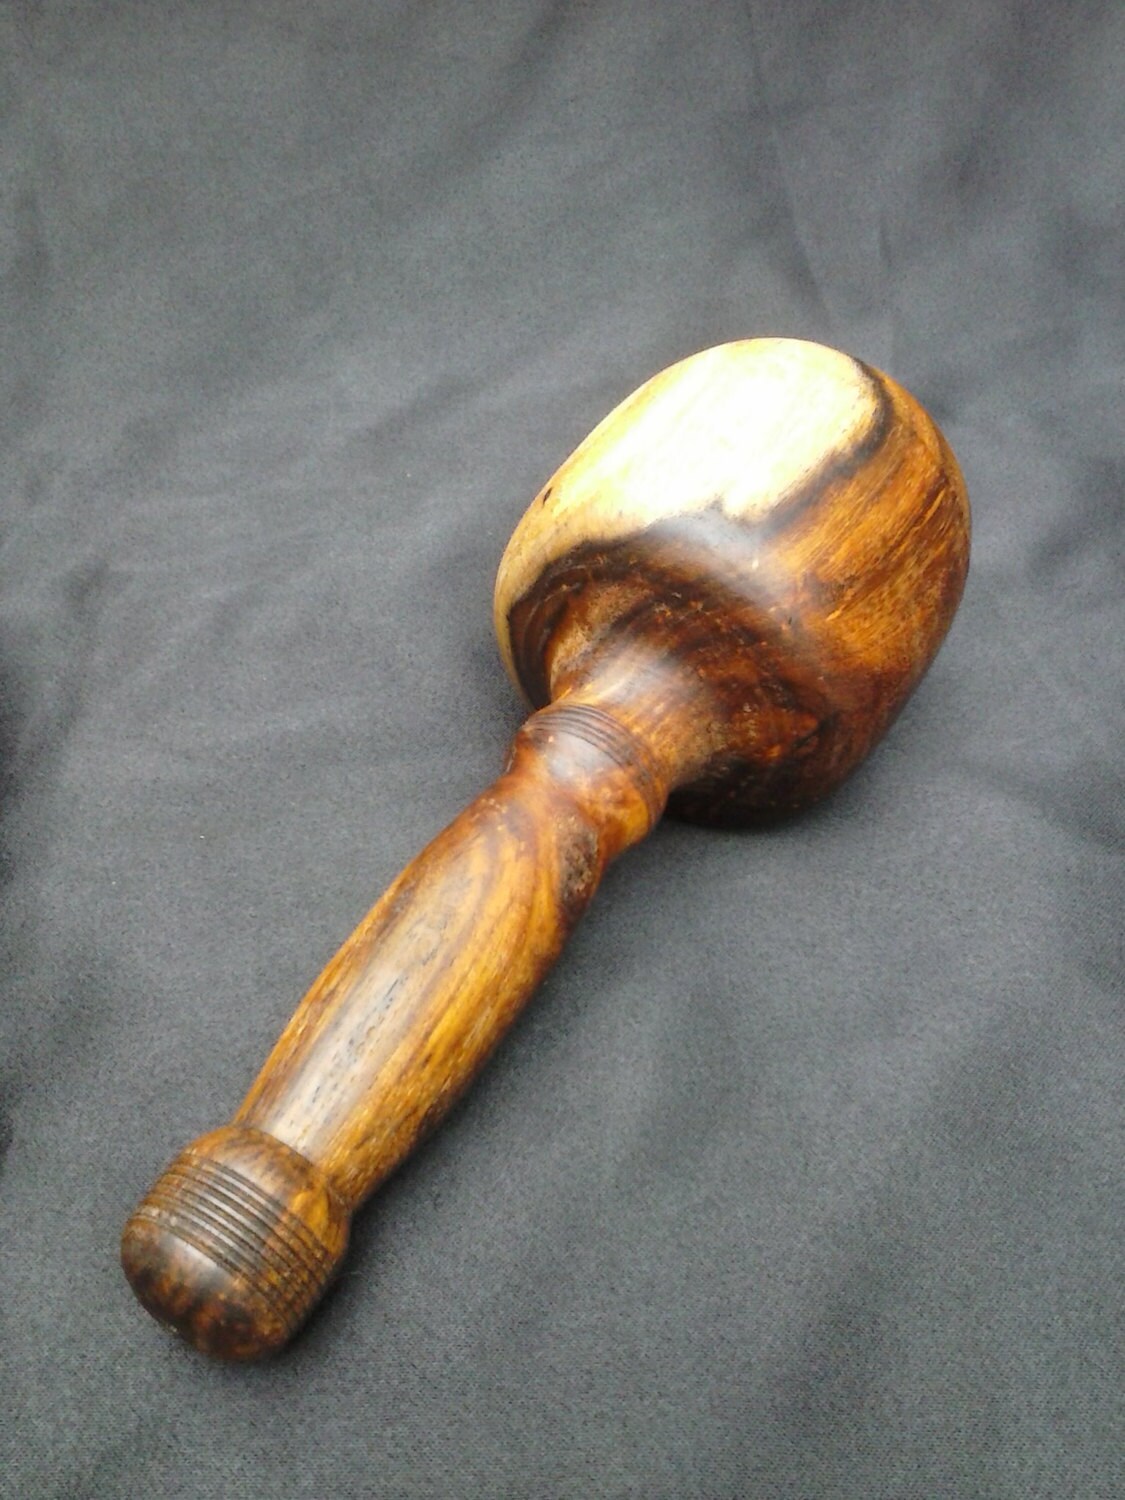 Hand Turned Wood Carving Mallet Woodworking Mallet made of